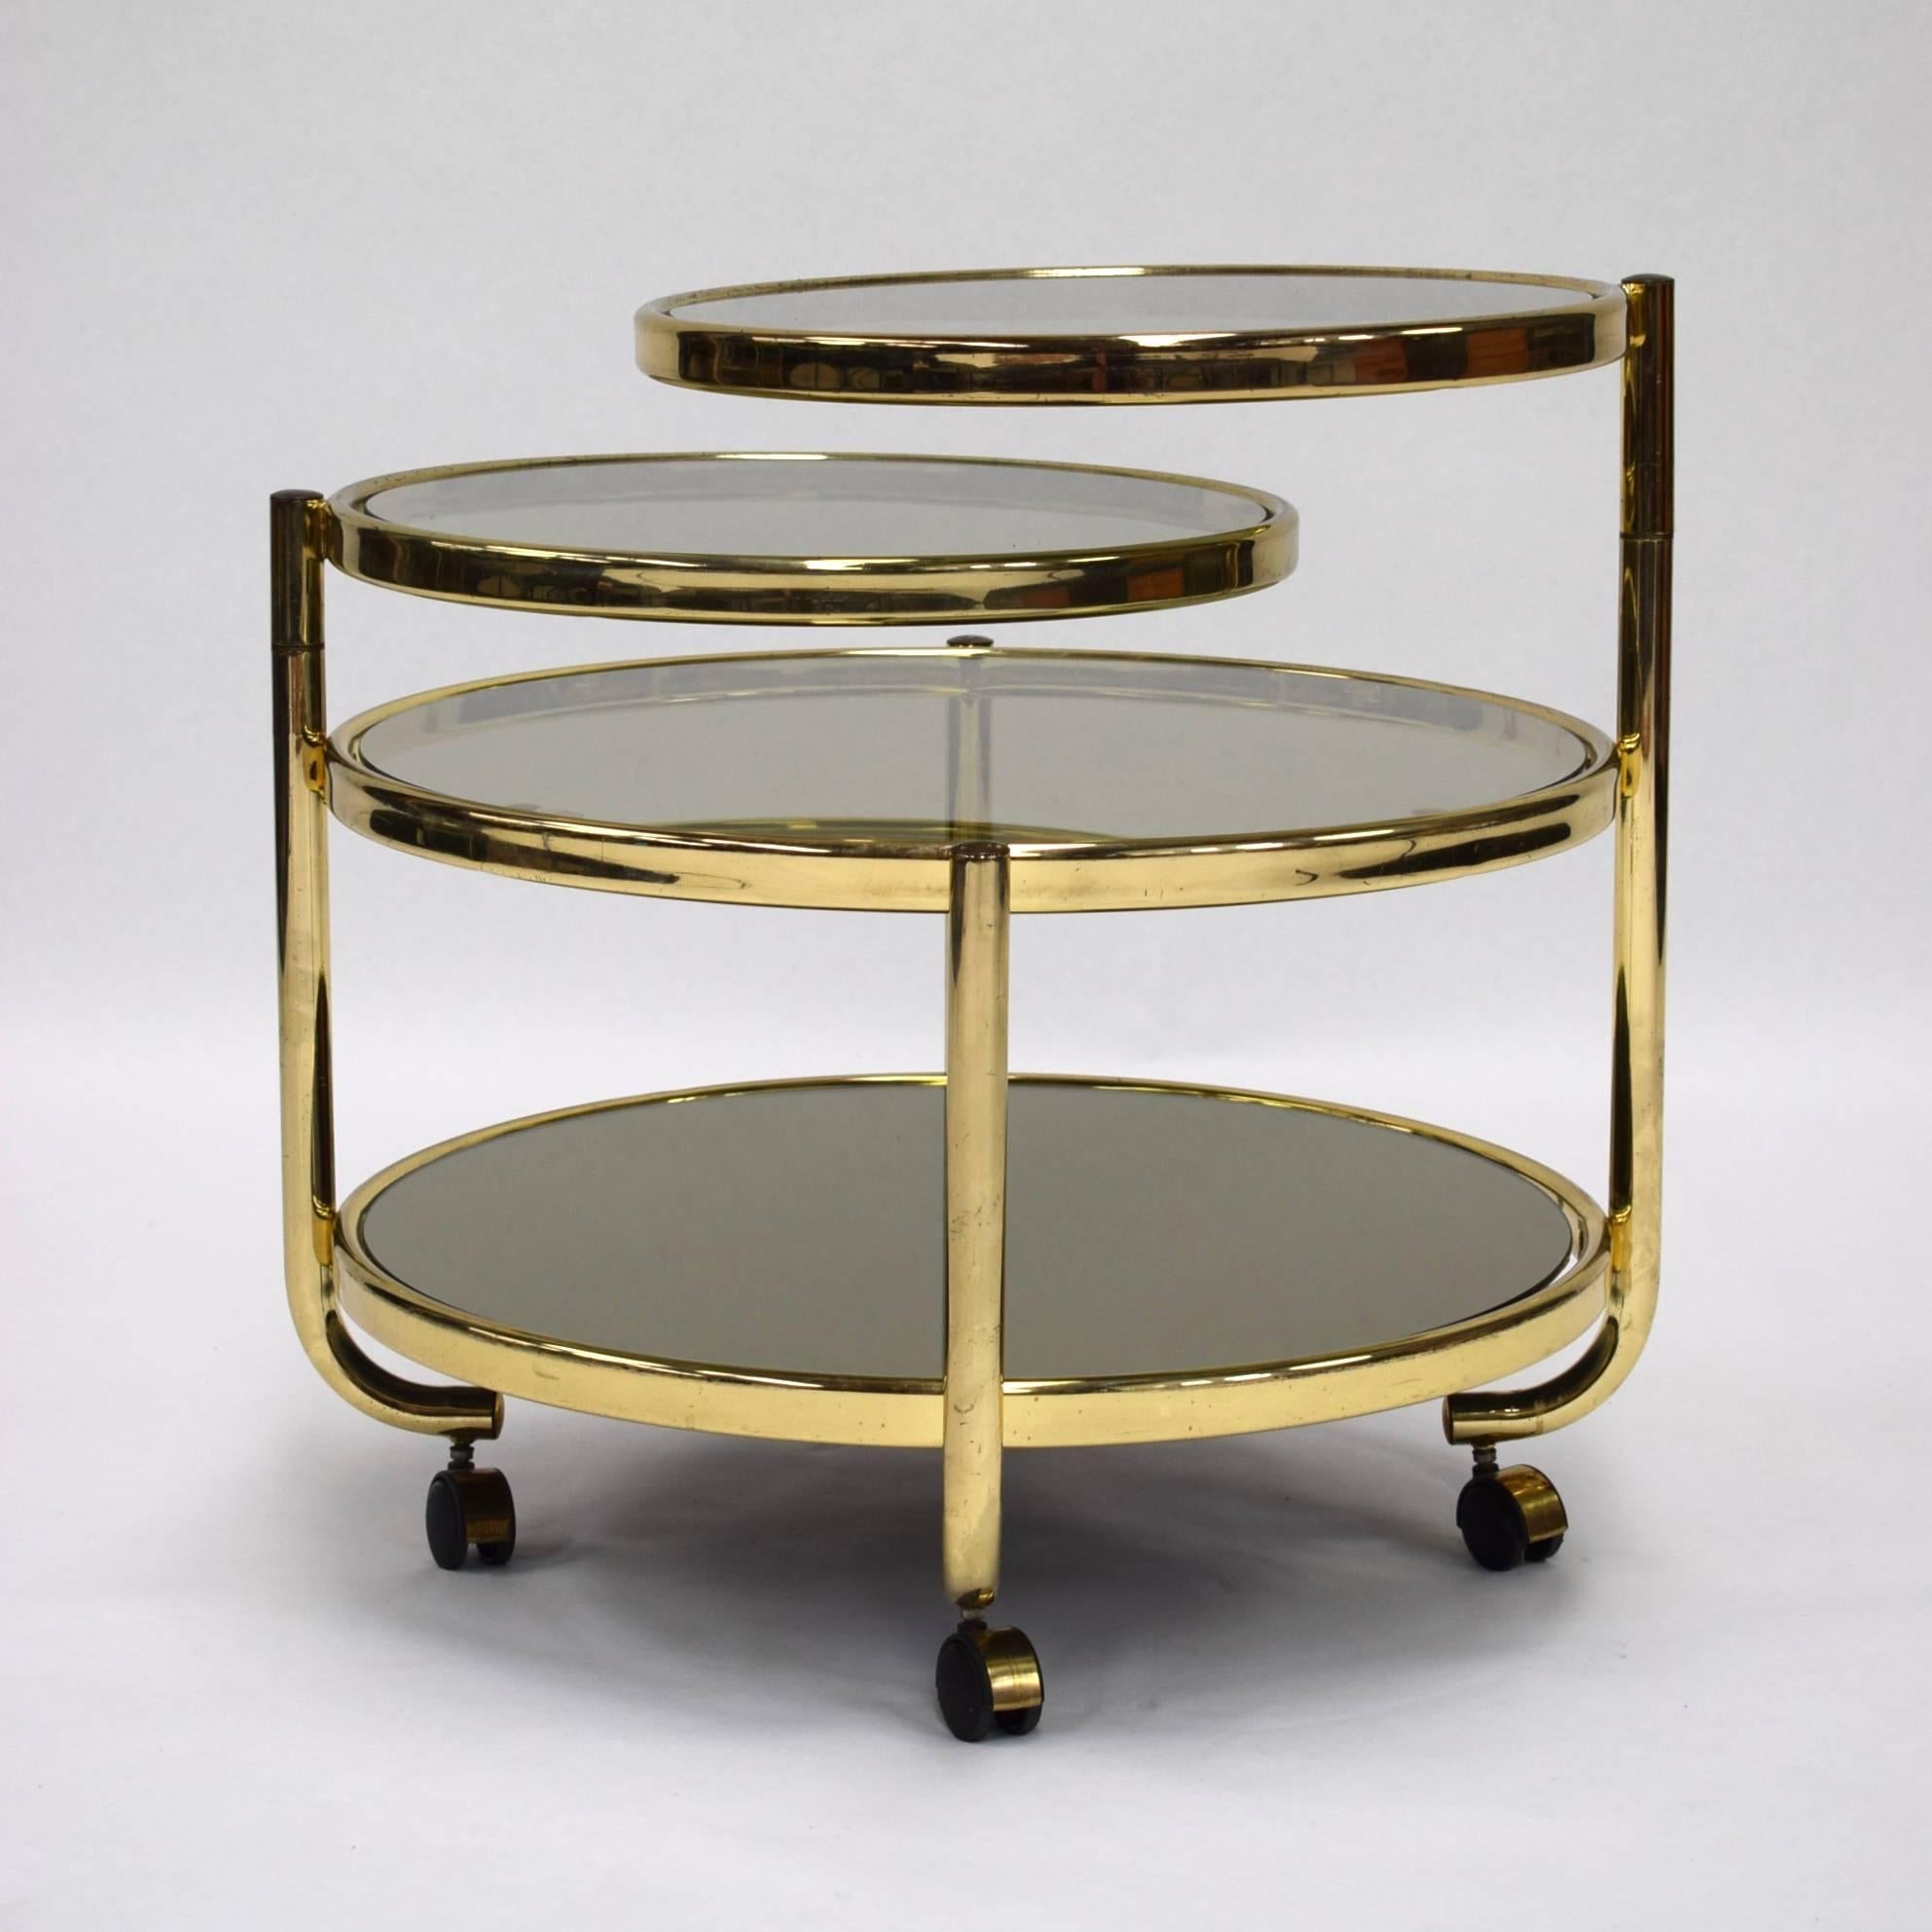 Mid-Century Modern Italian Round Brass and Glass Cocktail Bar Cart in Hollywood Regency Style